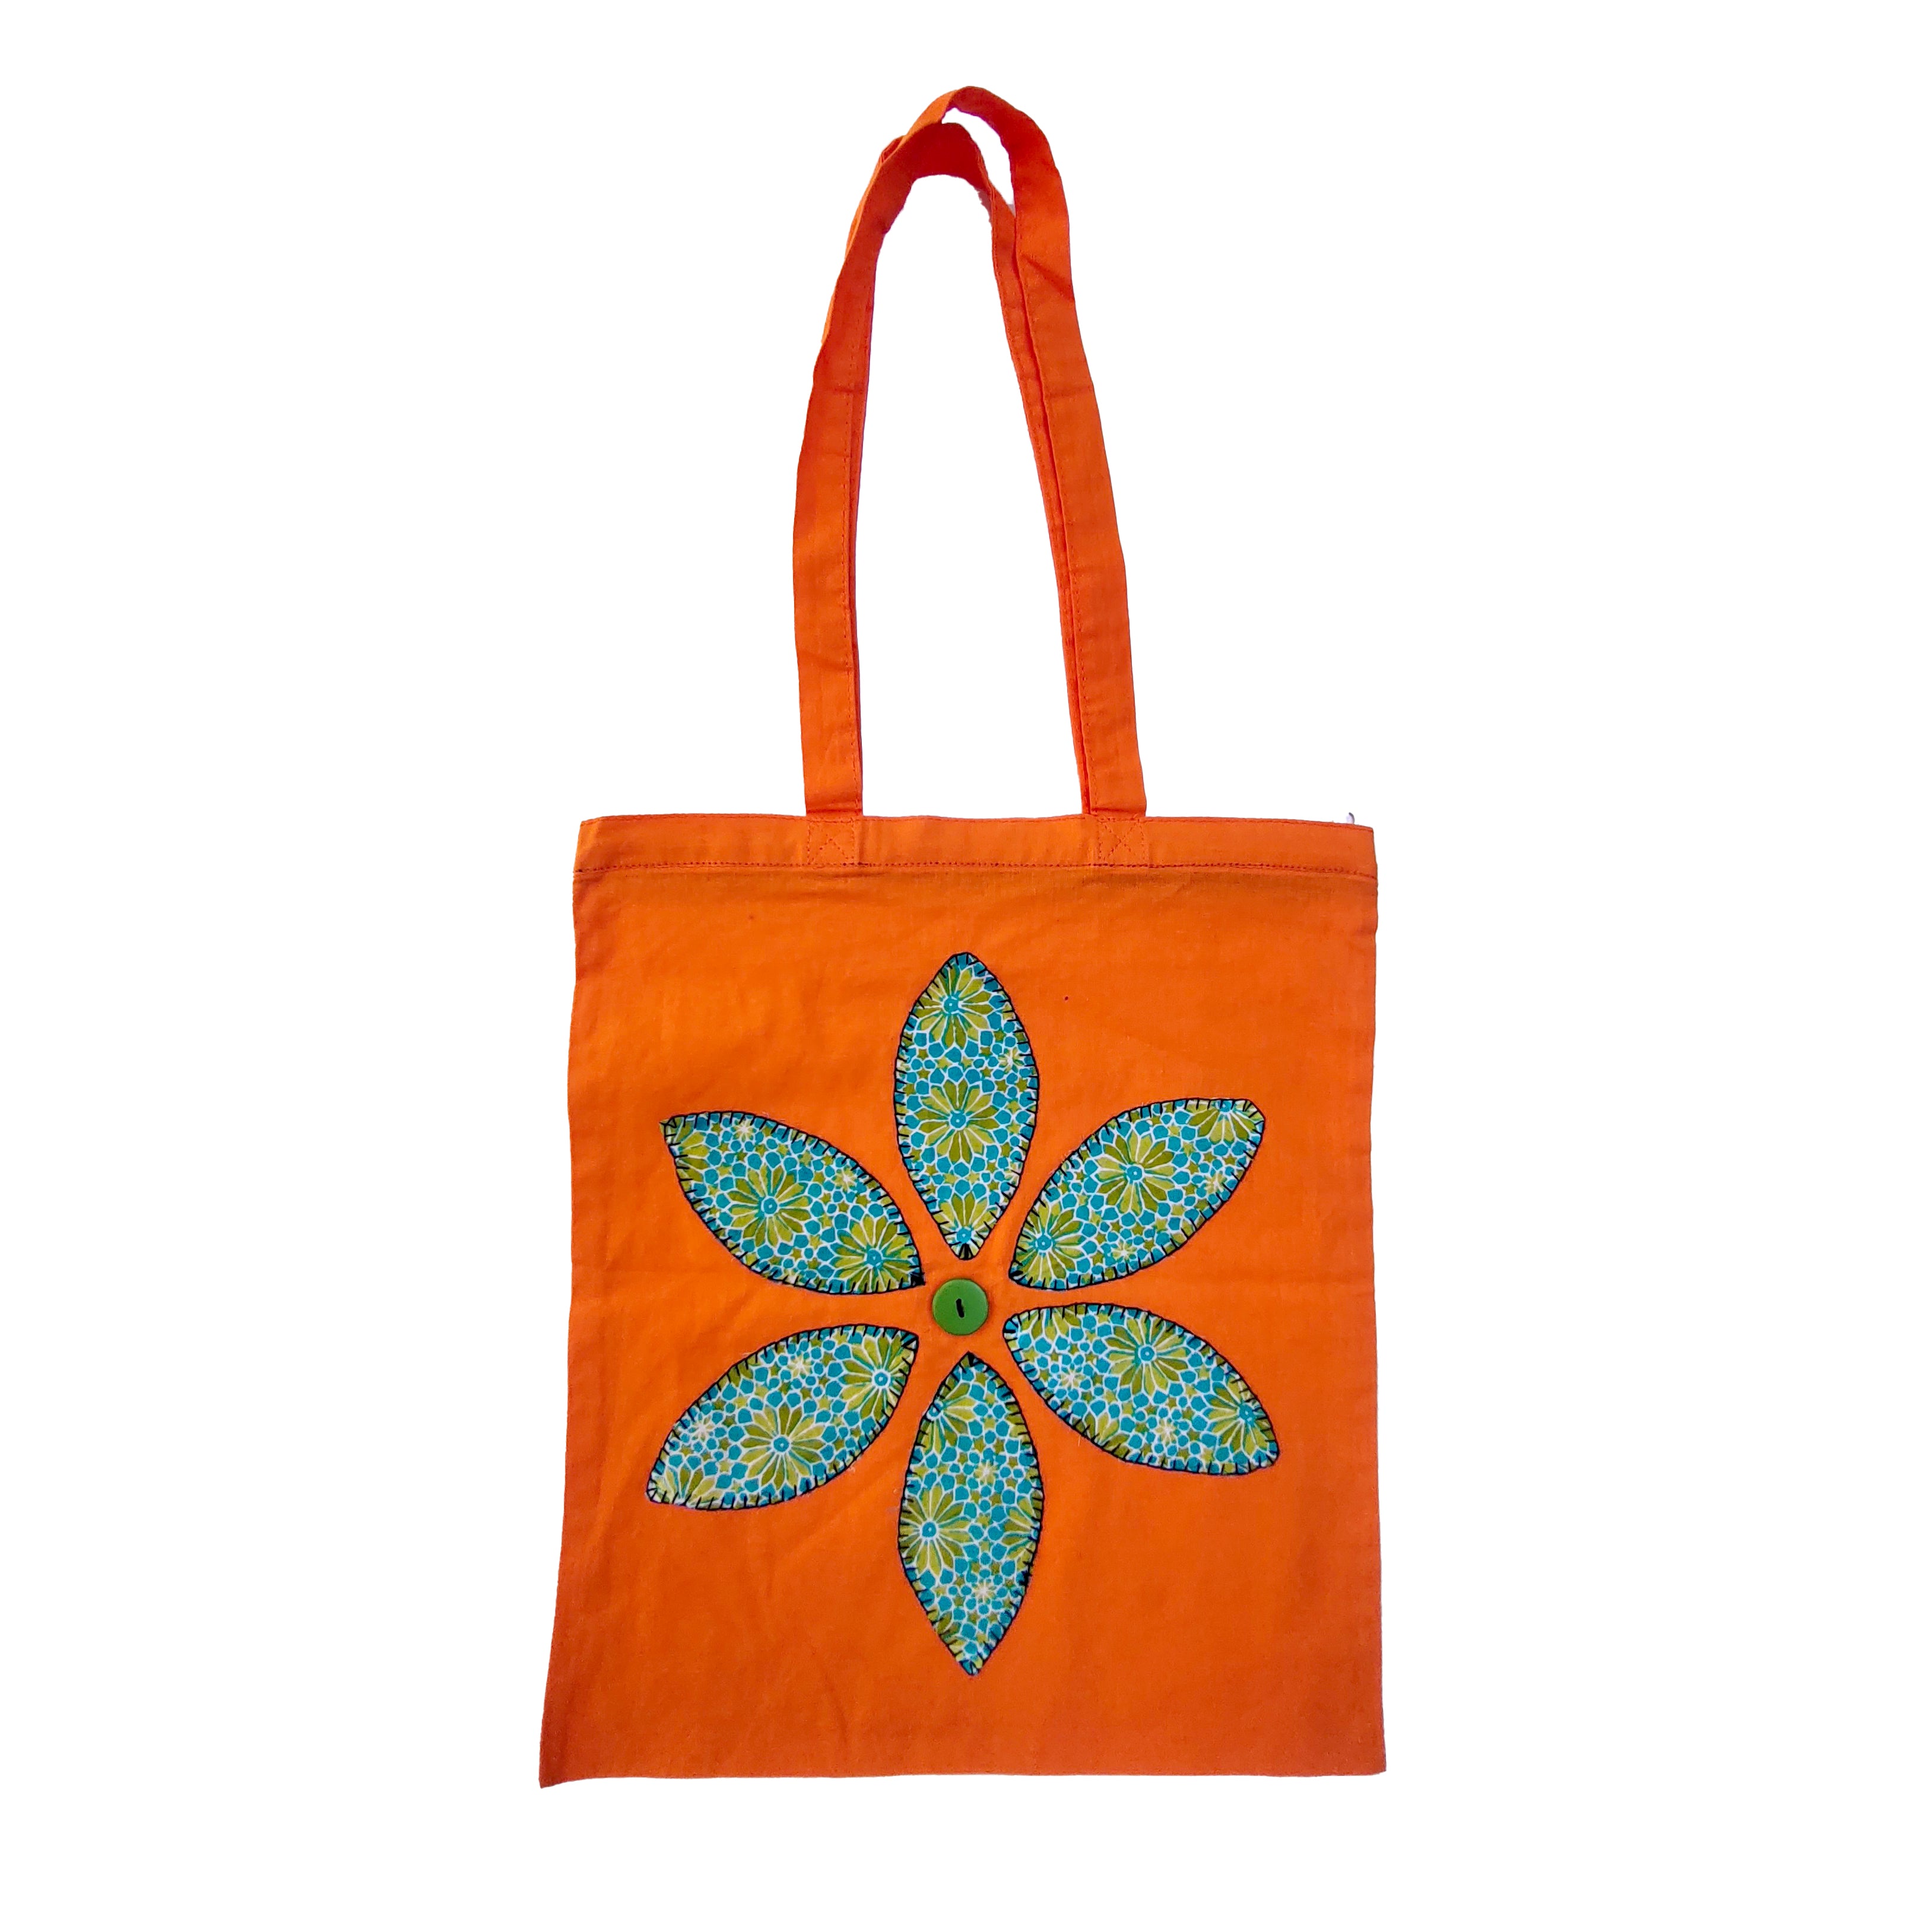 Applique cotton Tote bag Flower – Munch and Mull